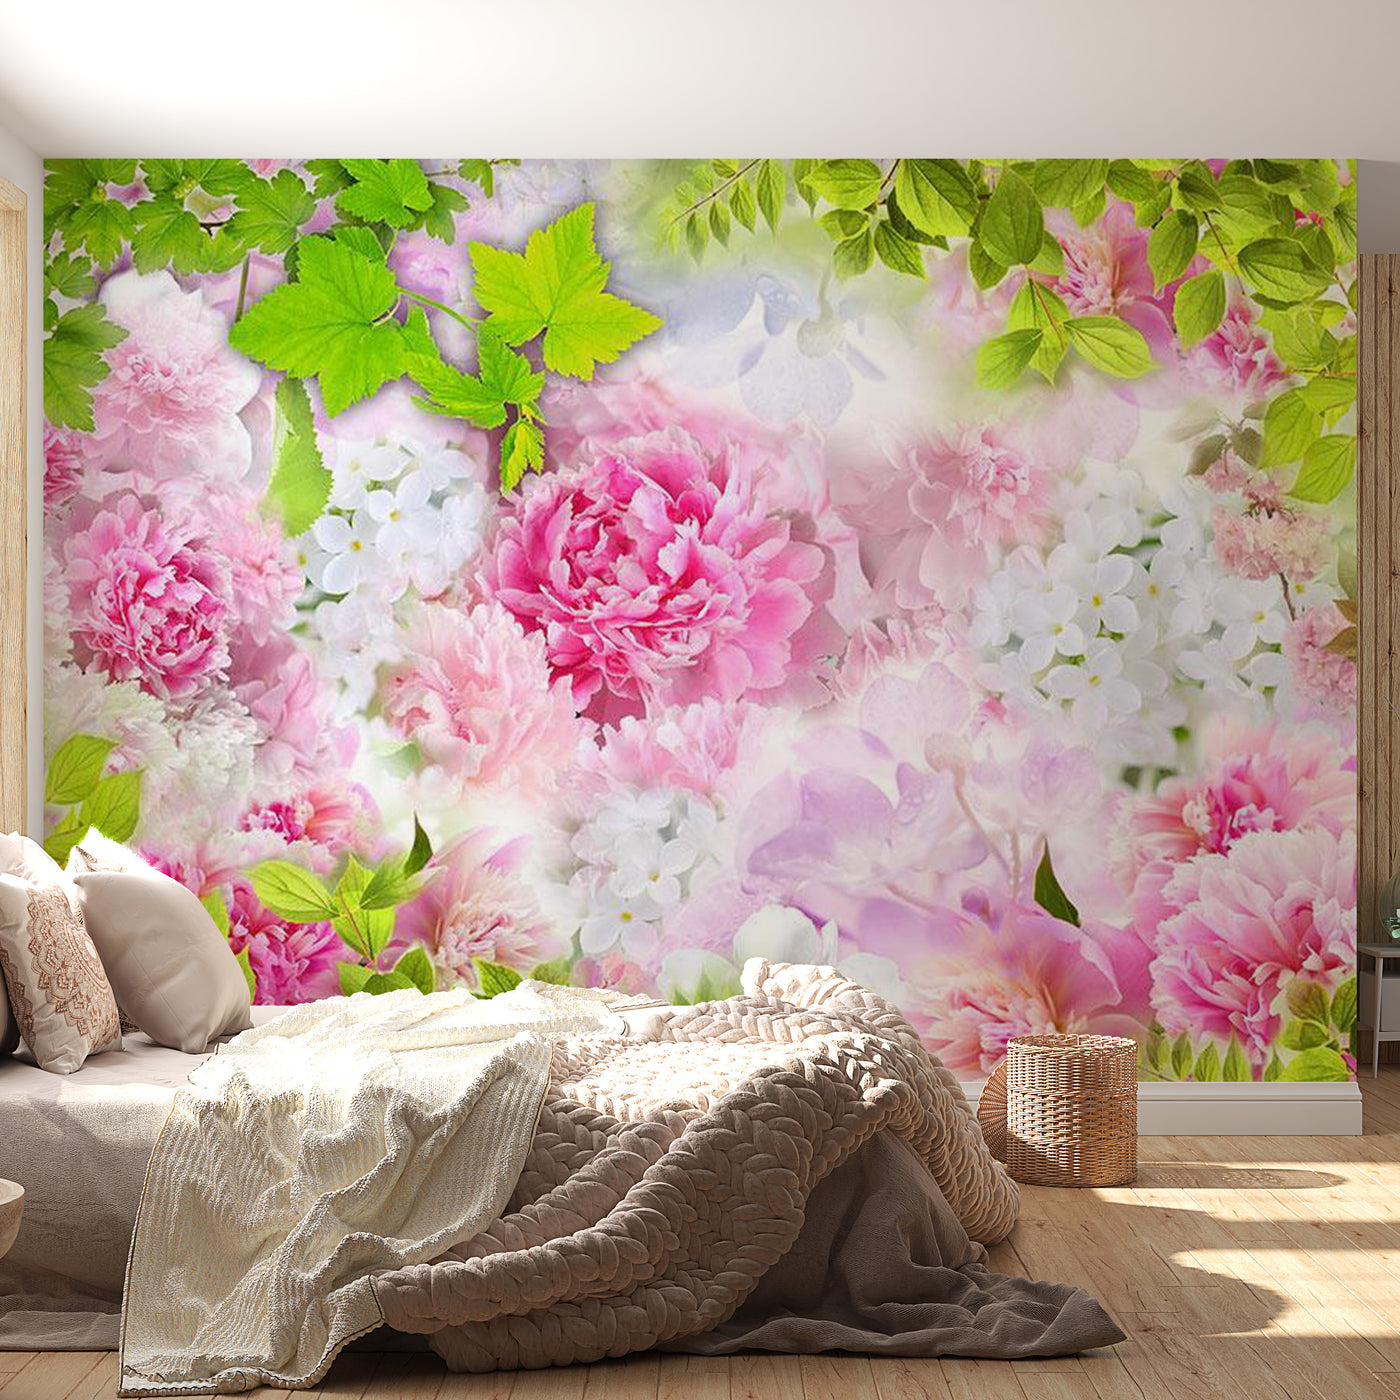 Peel & Stick Floral Wall Mural - Pink Peonies - Removable Wall Decals